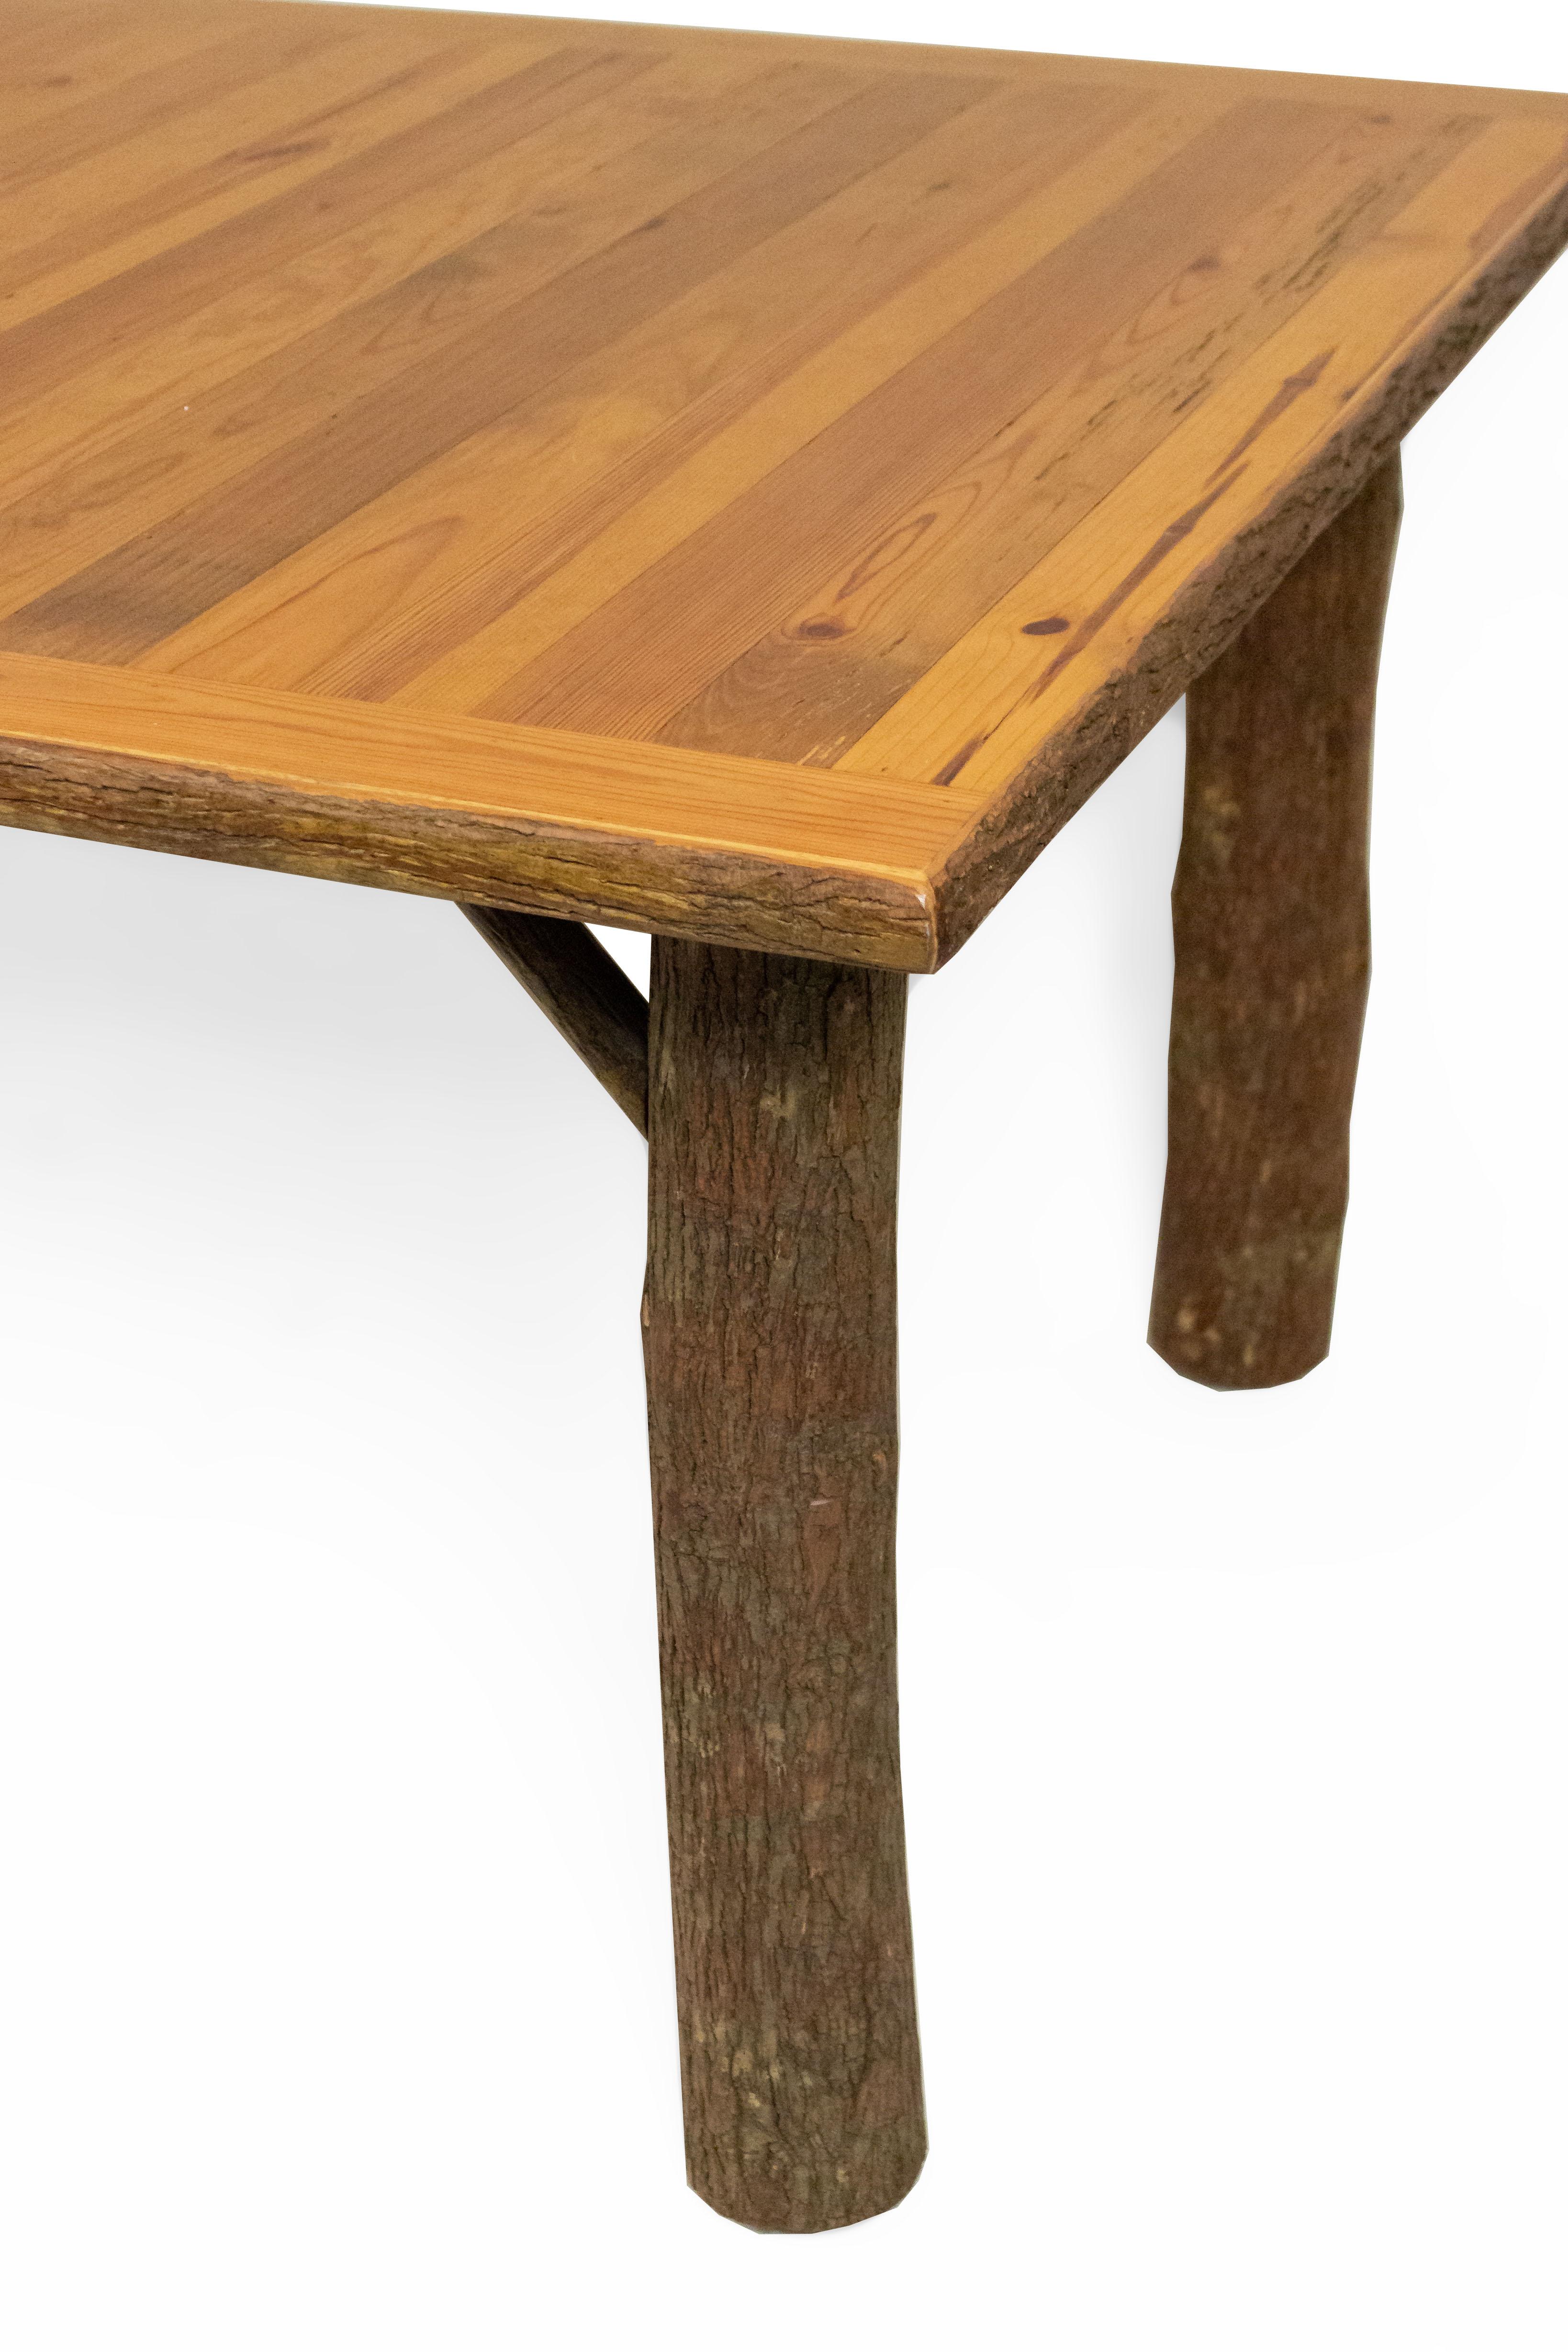 American Rustic Old Hickory Dining Table with Bark Legs For Sale